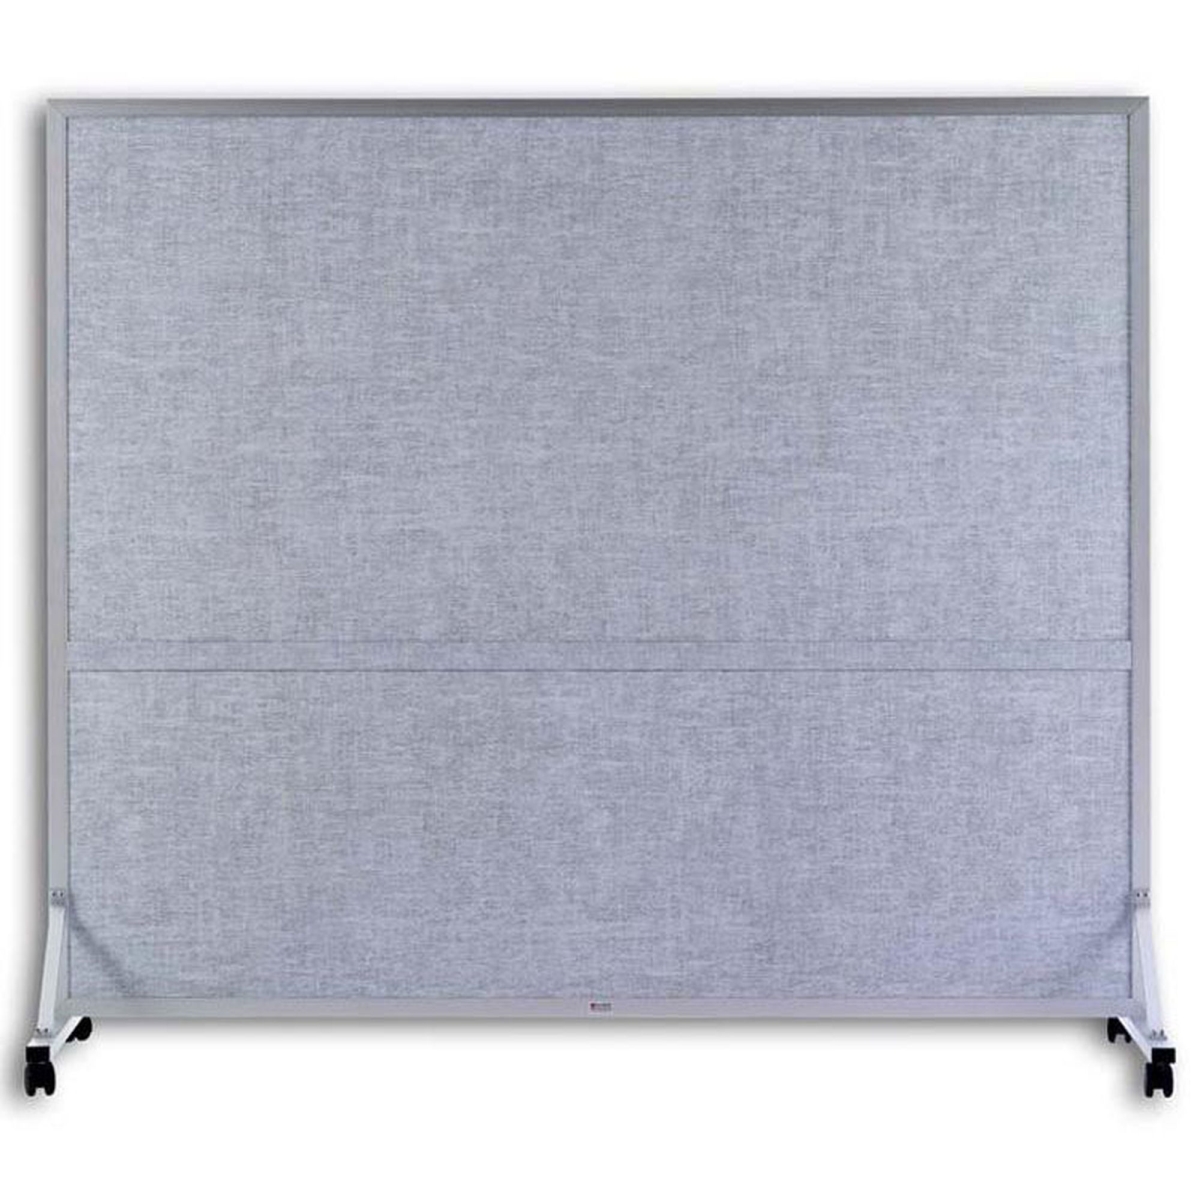 Bd6460002 64 X 72 In. Vinyl Double Duty Space Divider, Cotton